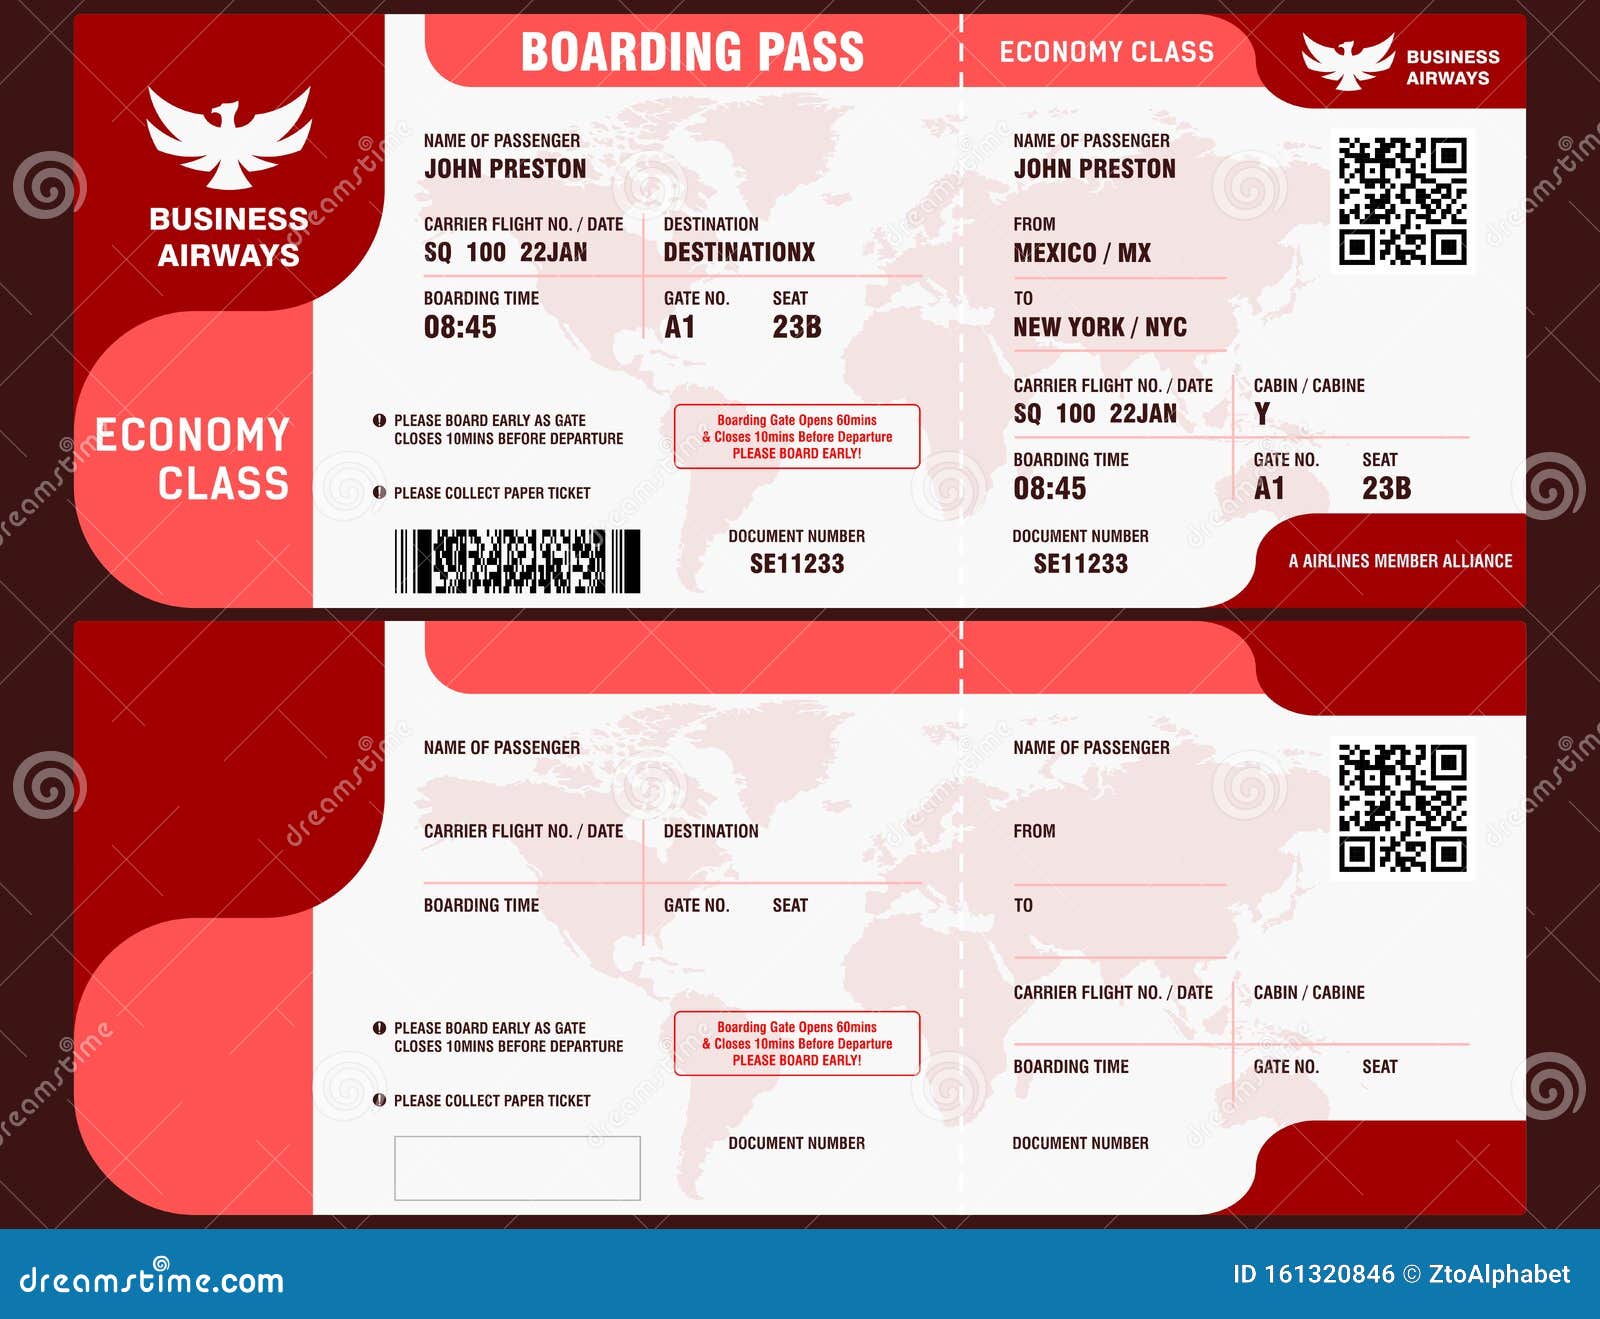 logo airlines & blank boarding pass